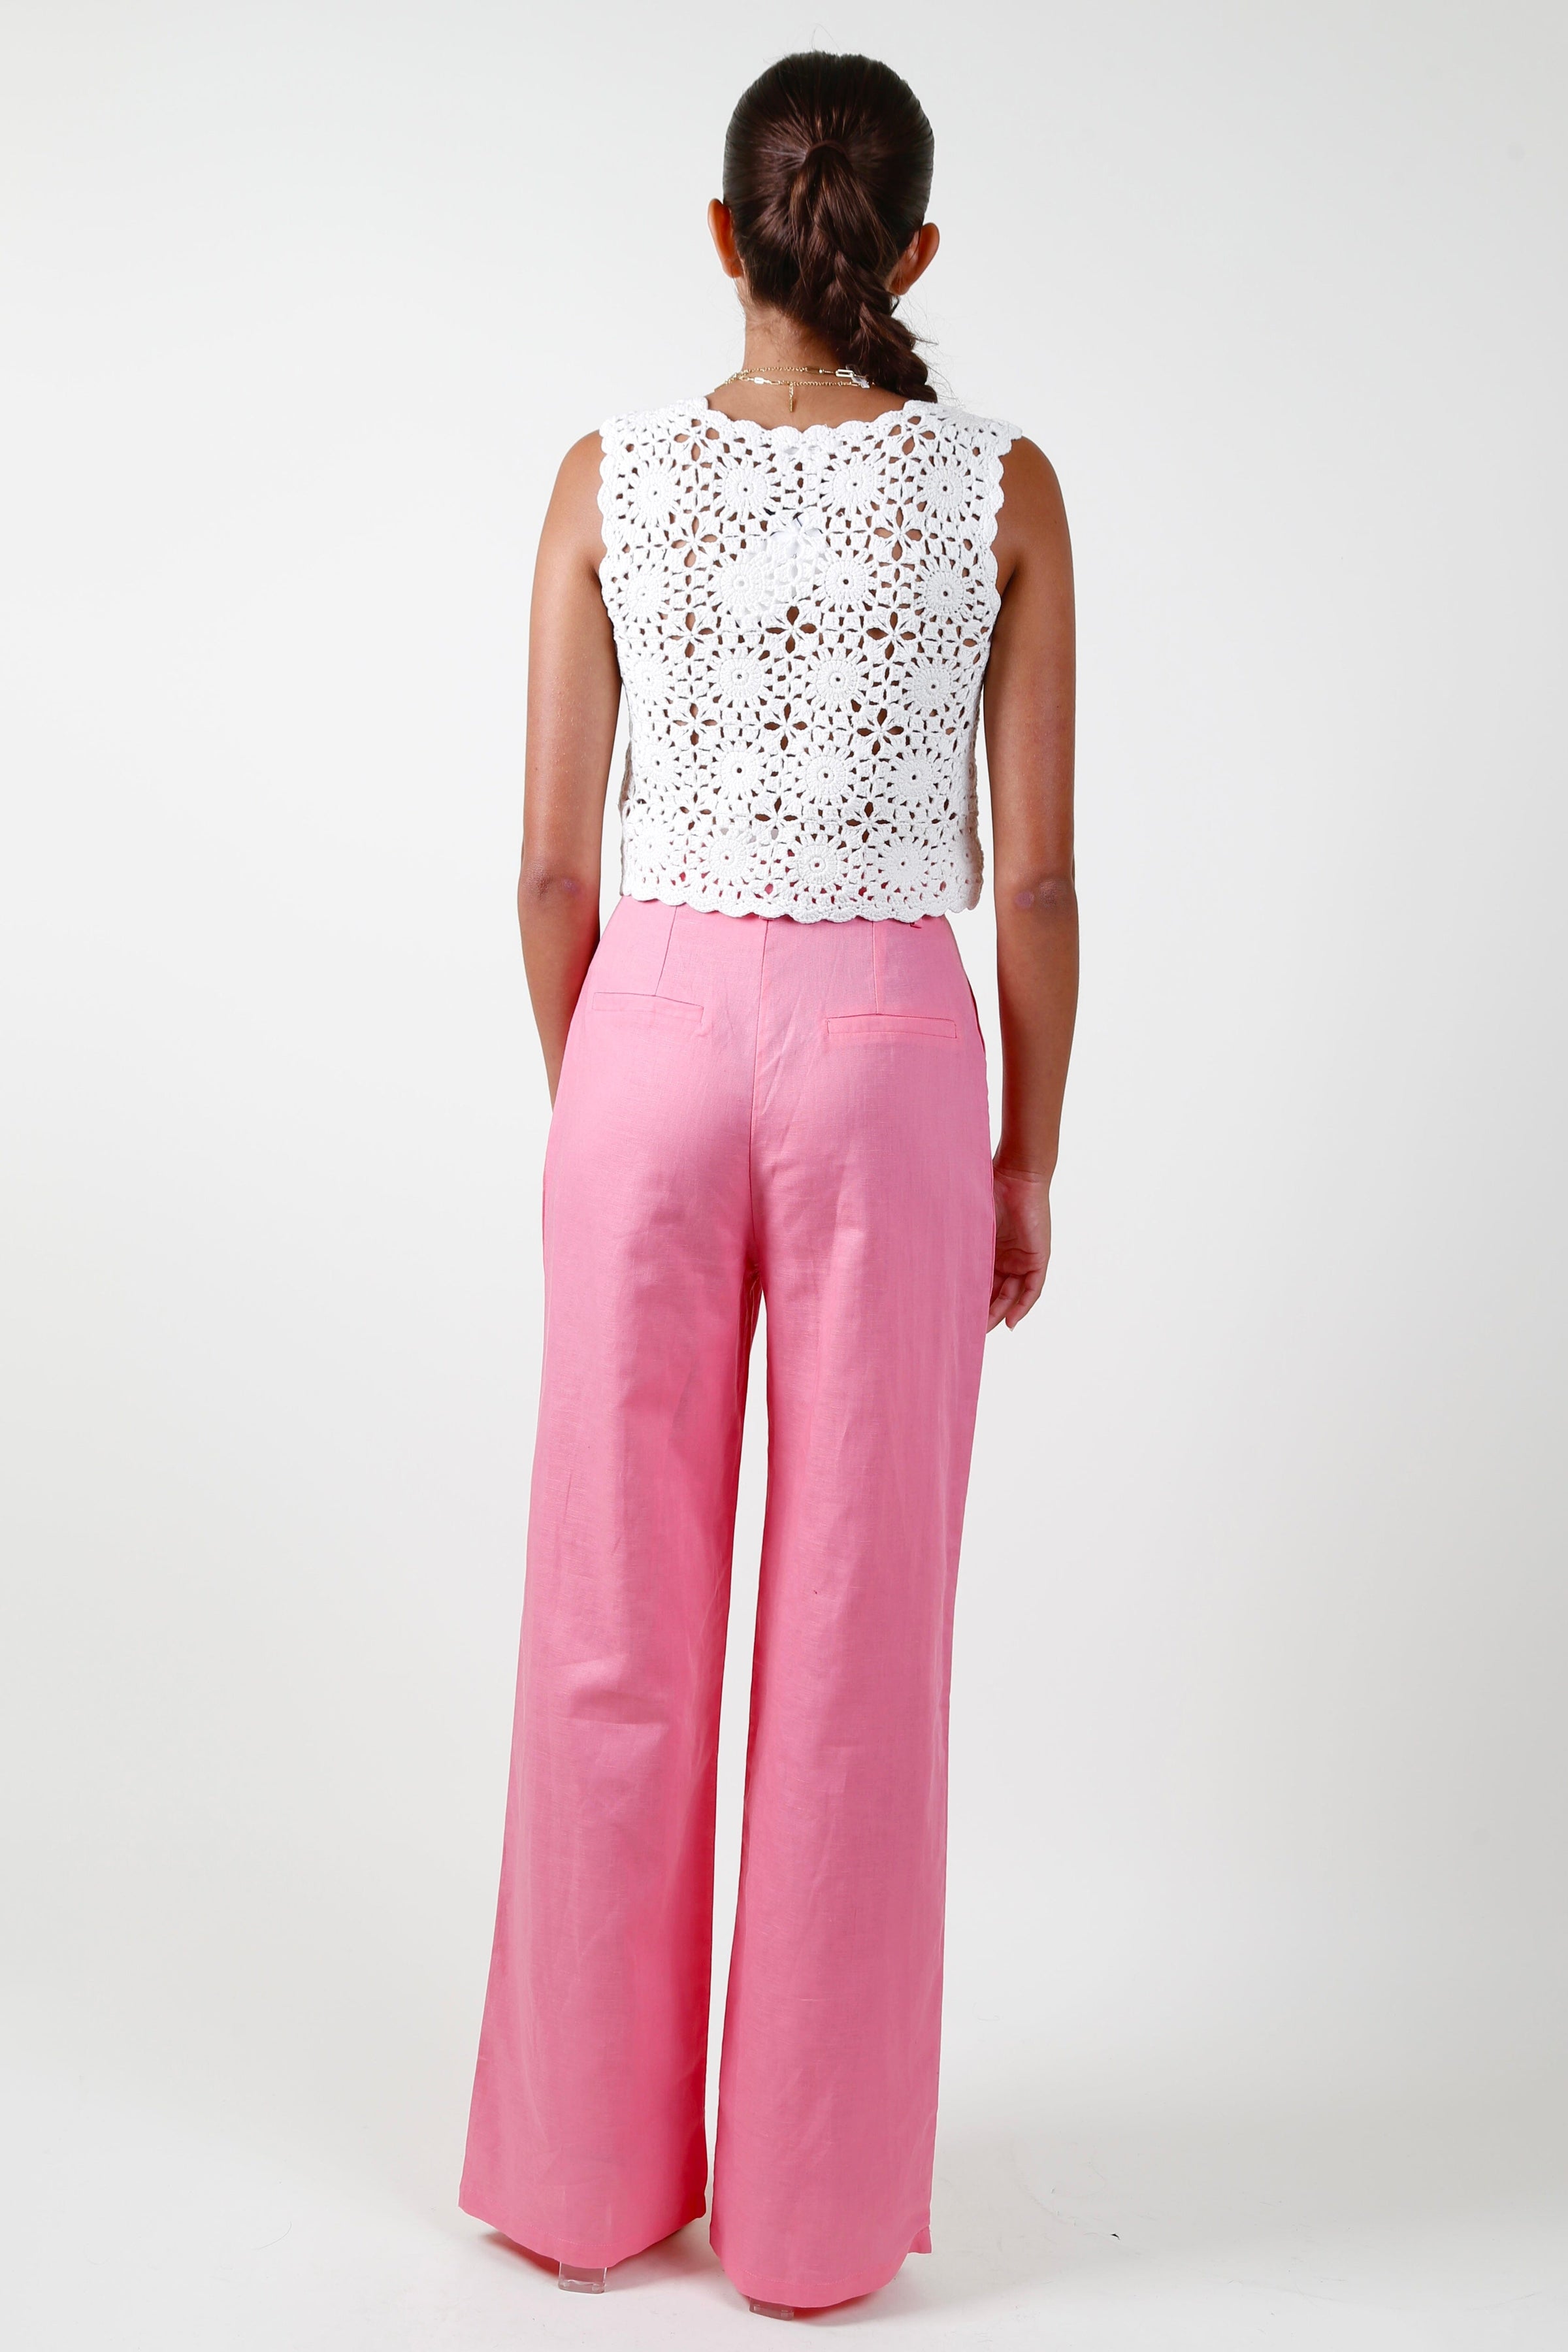 ASOS DESIGN wide leg suit pant with linen in dusty pink